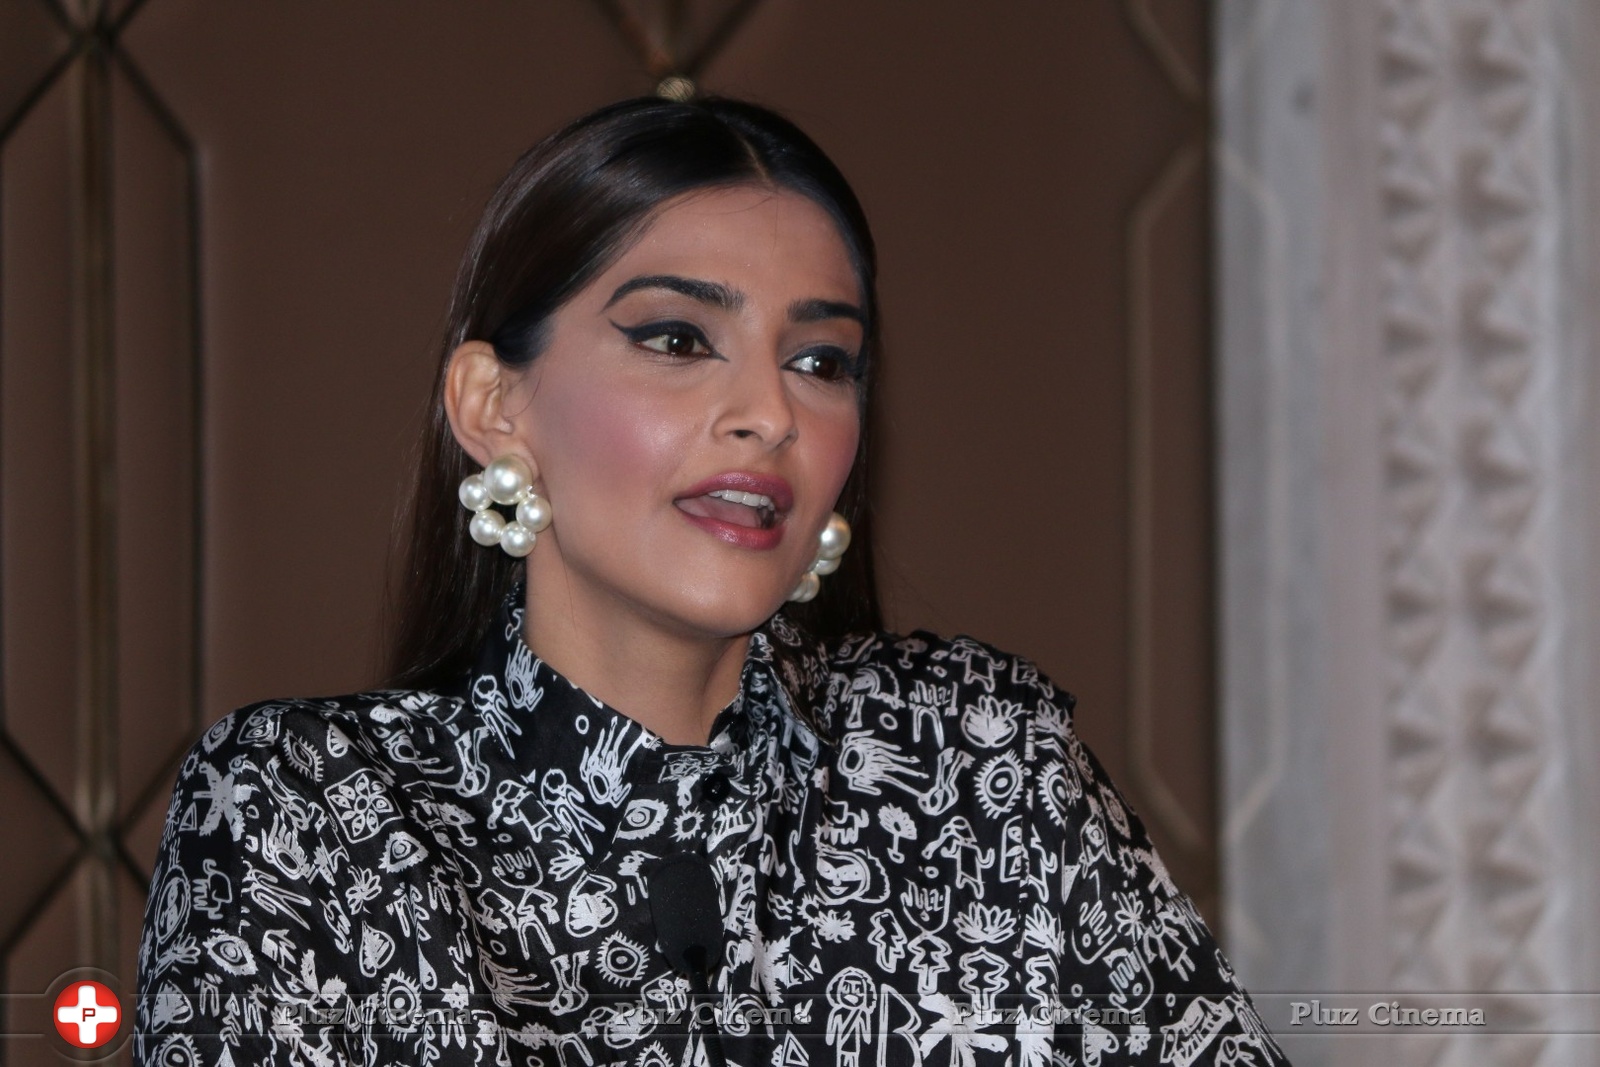 Sonam Kapoor Ahuja - Sonam Kapoor Support Fight Malnutrition In The Country In Association With Fight Hunger Foundation and ACF Photos | Picture 1433537